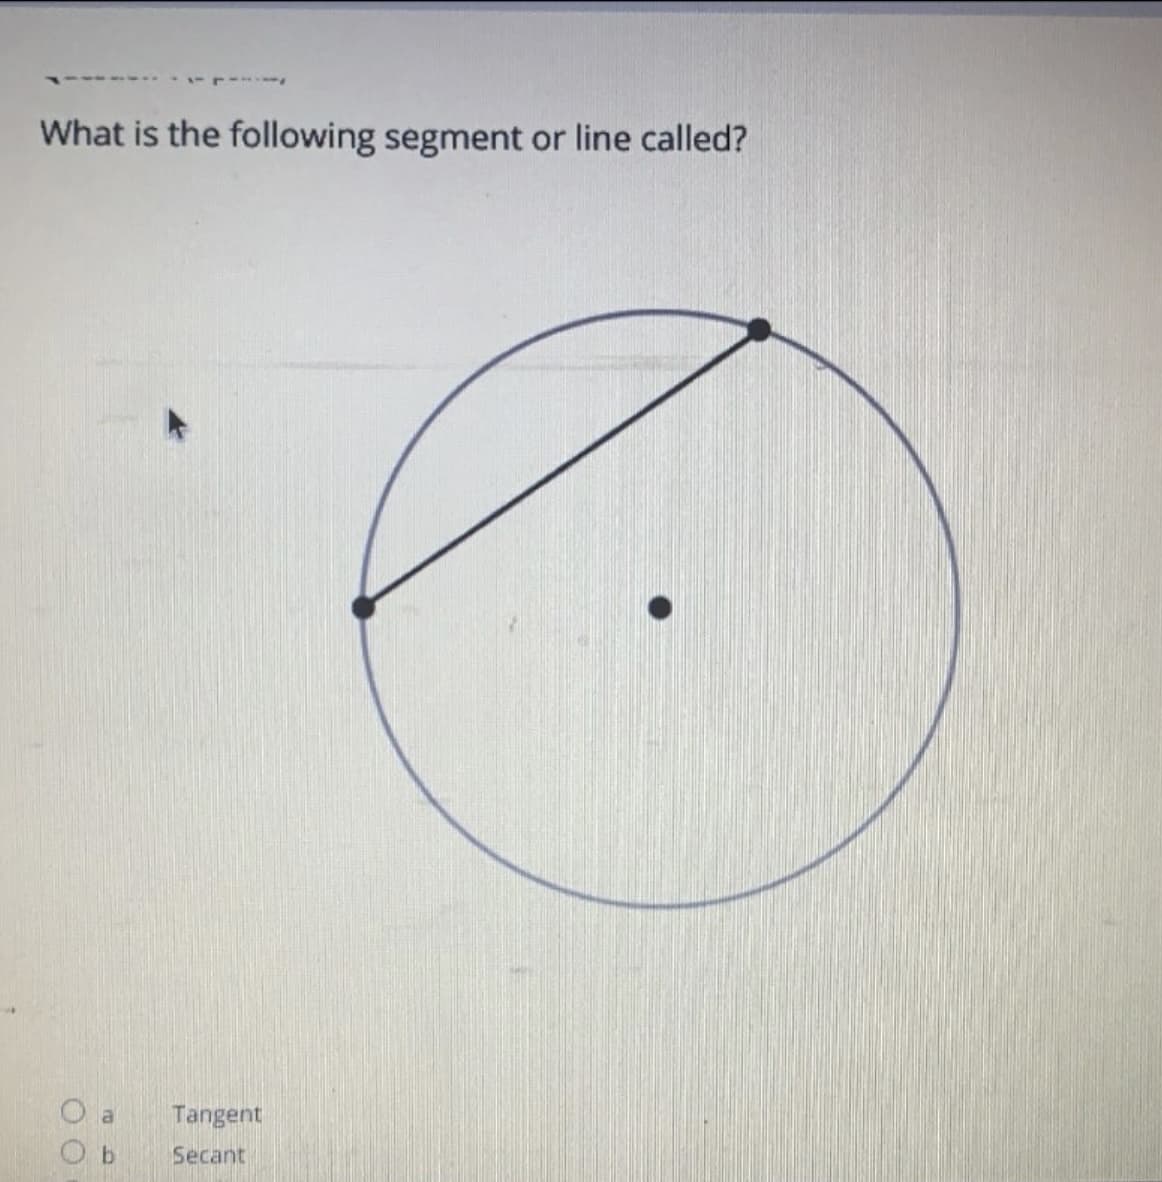 What is the following segment or line called?
O a
O b
Tangent
Secant
